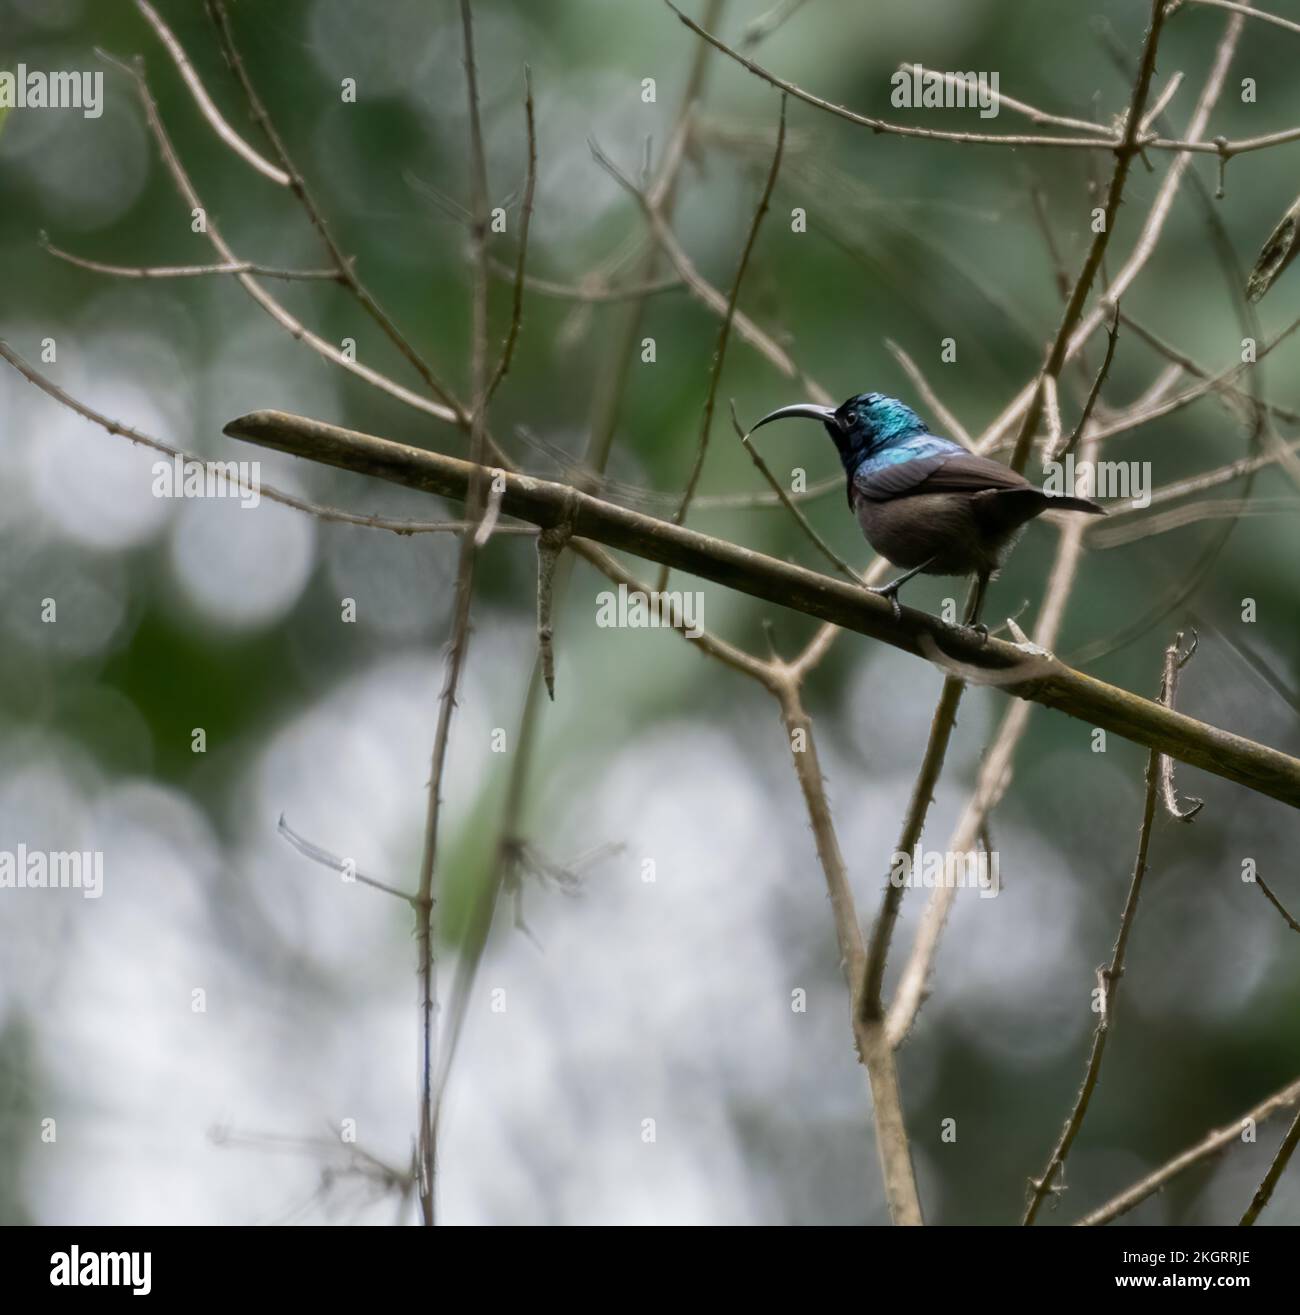 A close-up of Loten's sunbird perched on a tree twig in the forest Stock Photo